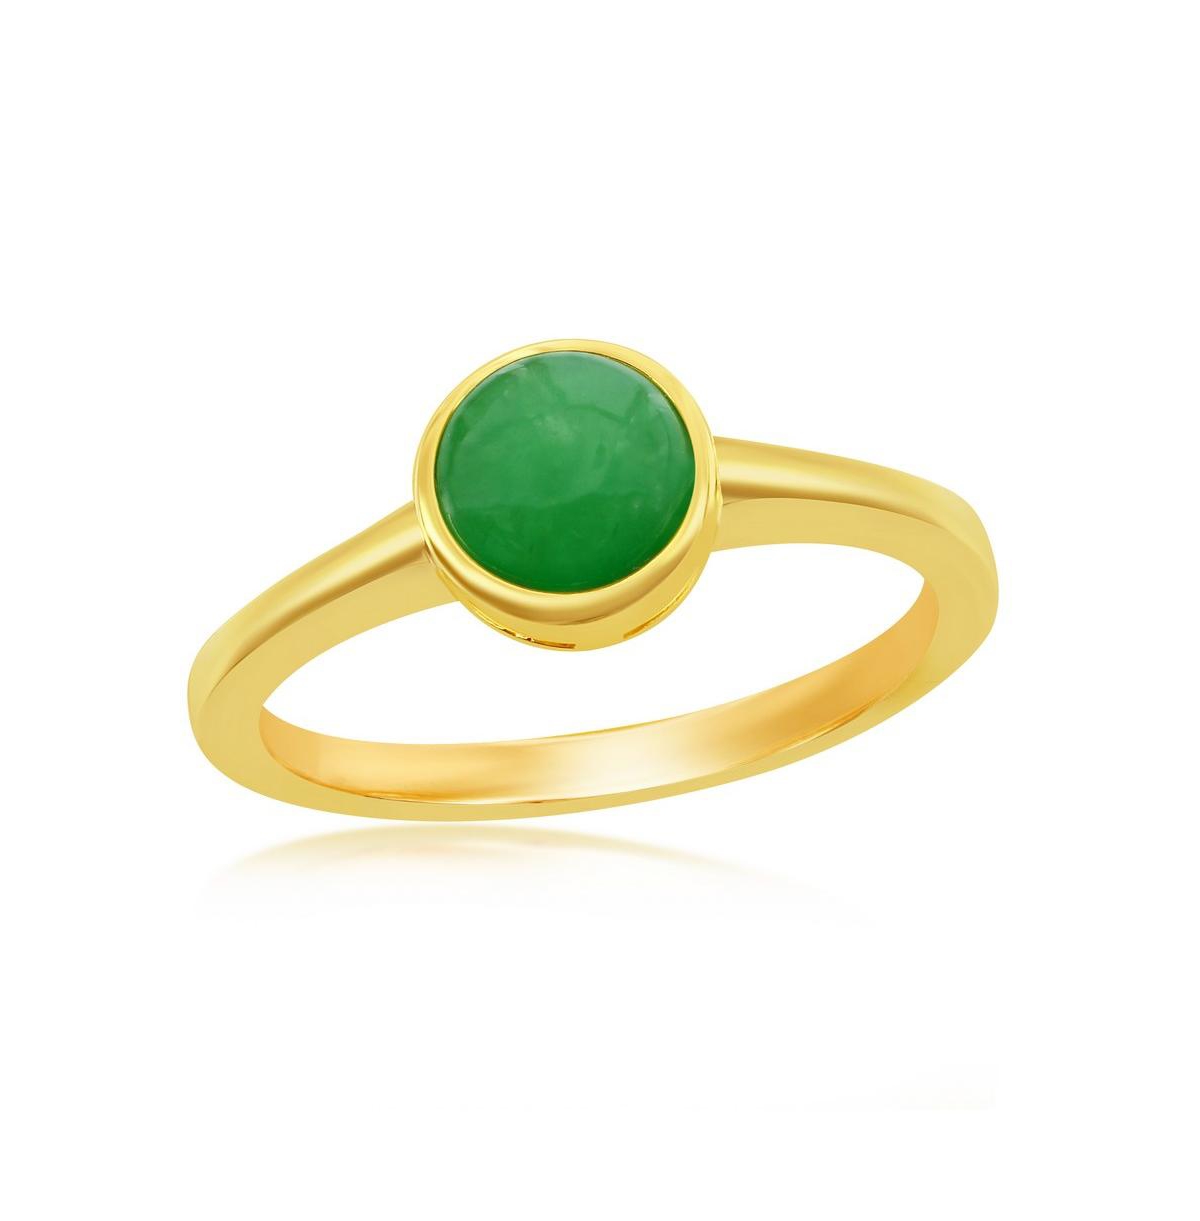 Sterling Silver 6mm Round Jade Solitaire Ring - Green